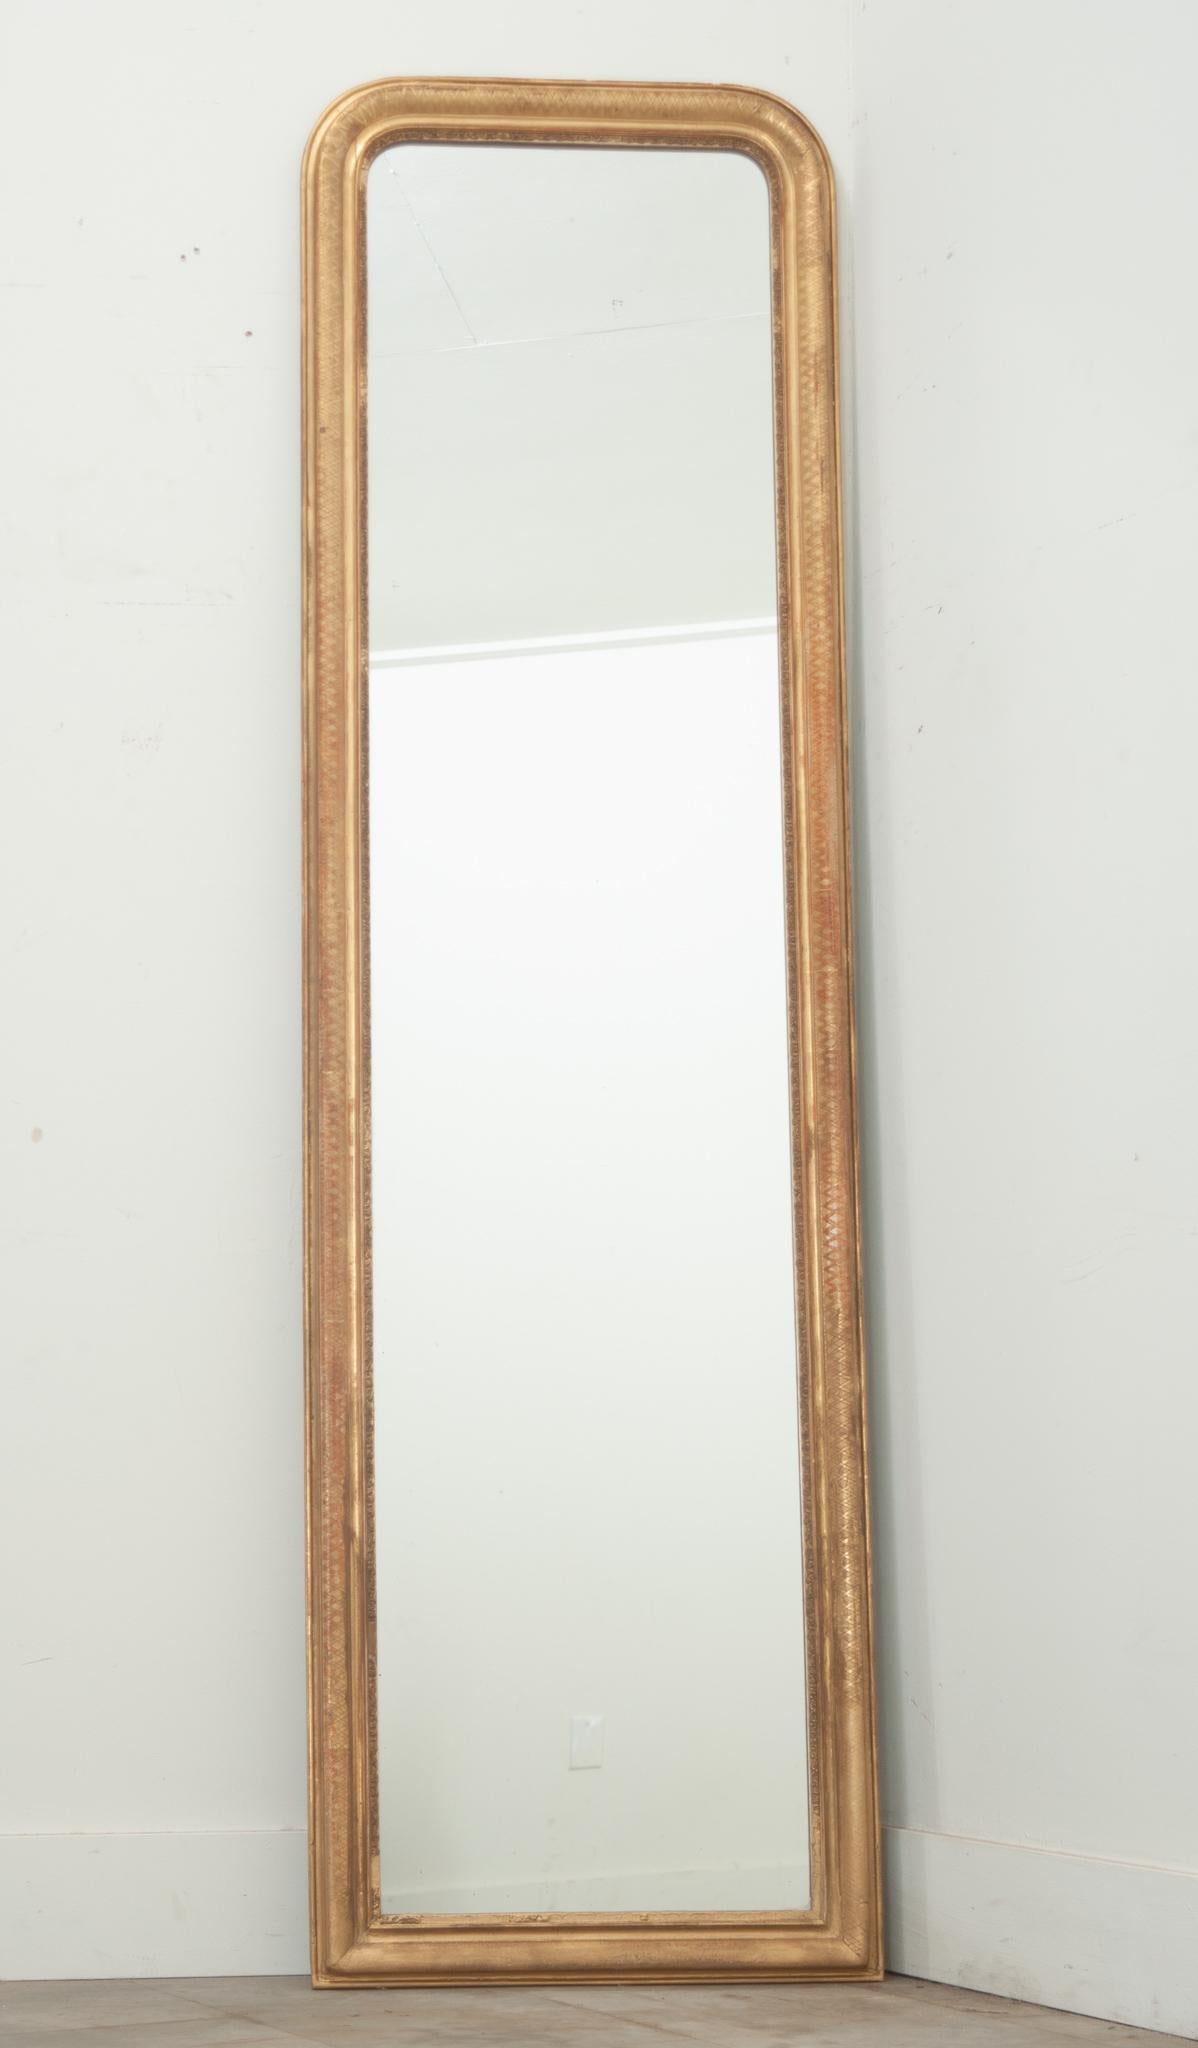 A tall and narrow Louis Philippe dressing mirror made in France. This uniquely sized mirror features a simple frame and the original mirror plate.The original gilding on the frame shows some patina, where natural wear has revealed the reddish bole